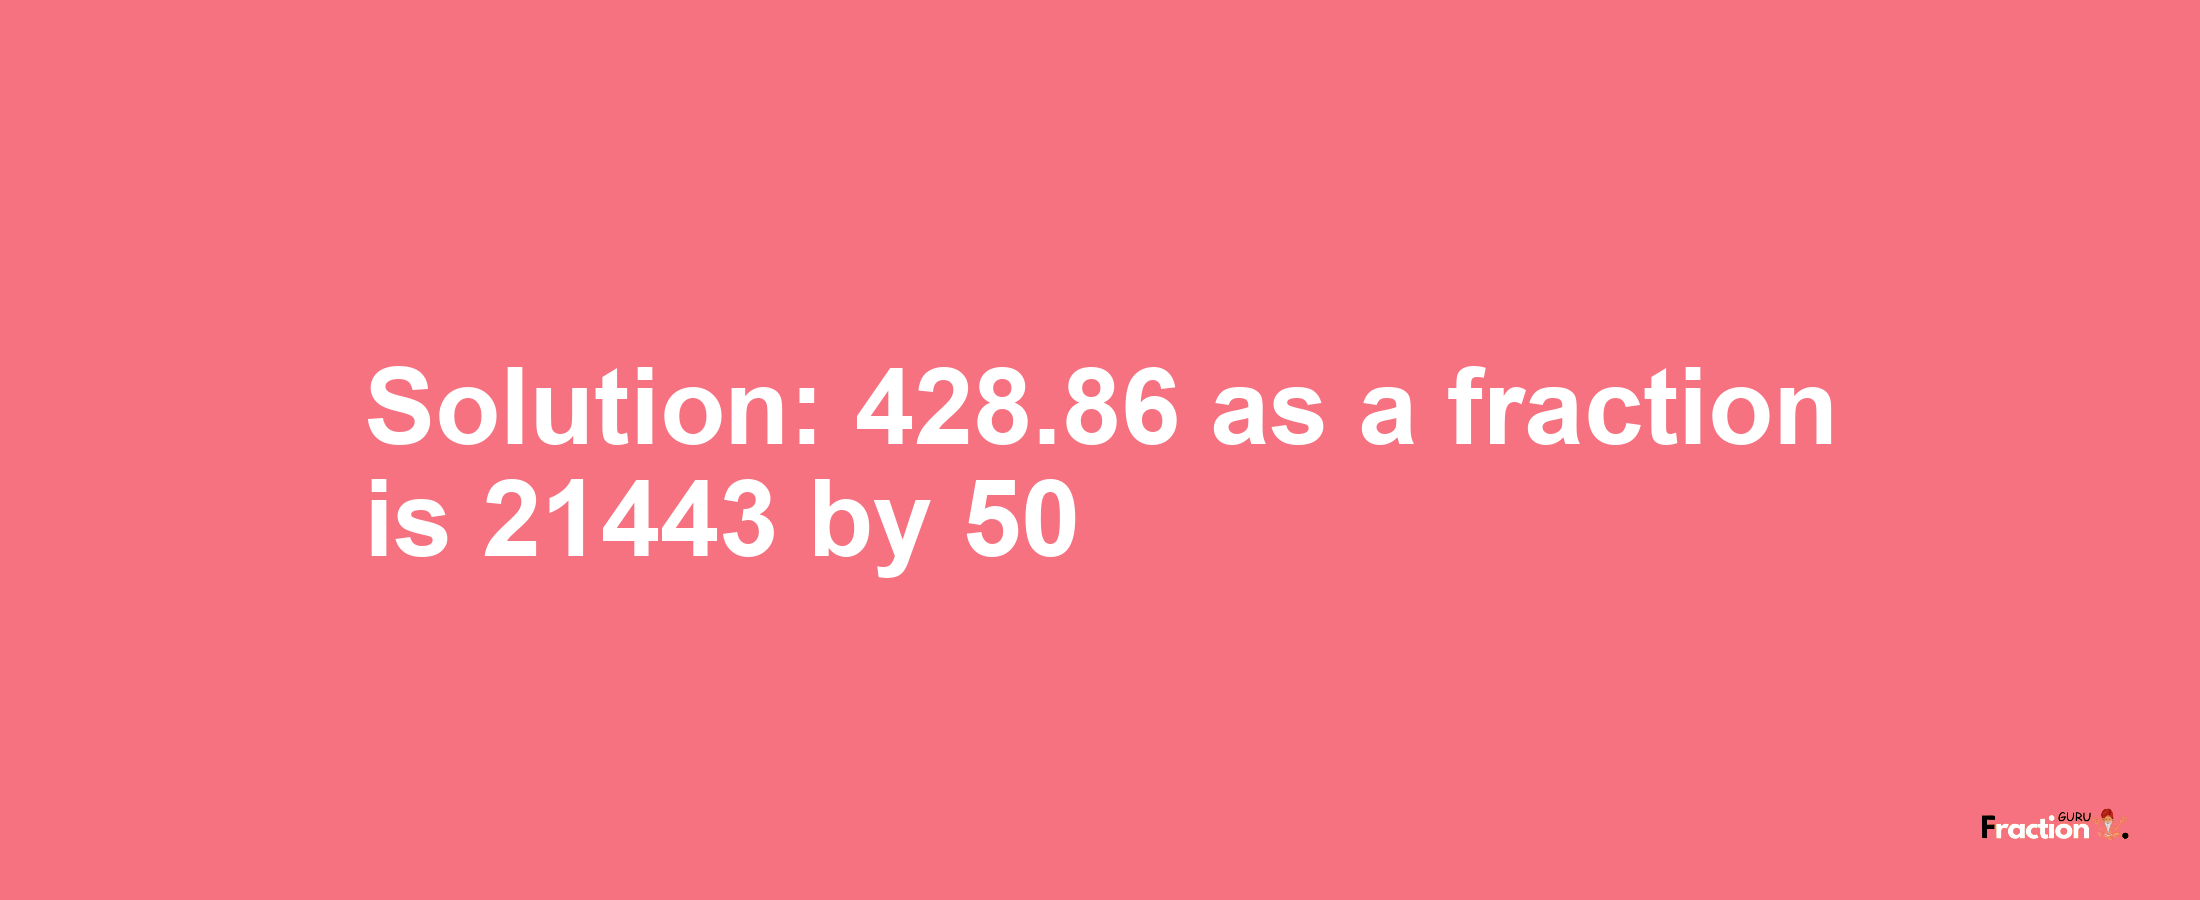 Solution:428.86 as a fraction is 21443/50